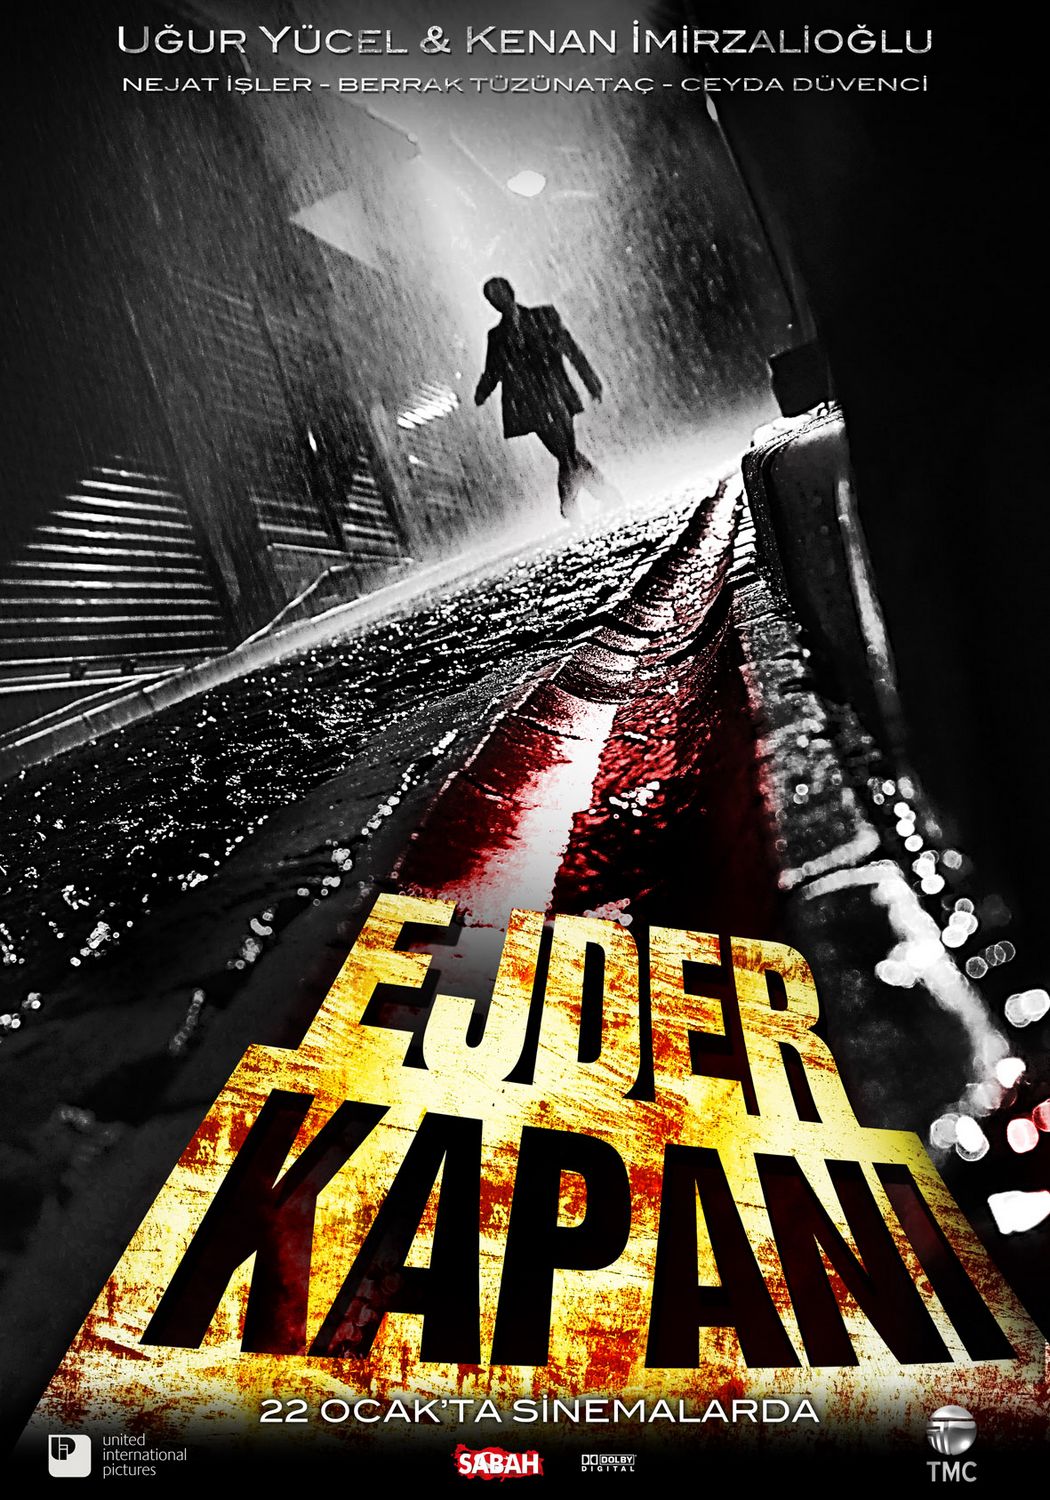 Extra Large Movie Poster Image for Ejder kapani (#1 of 3)